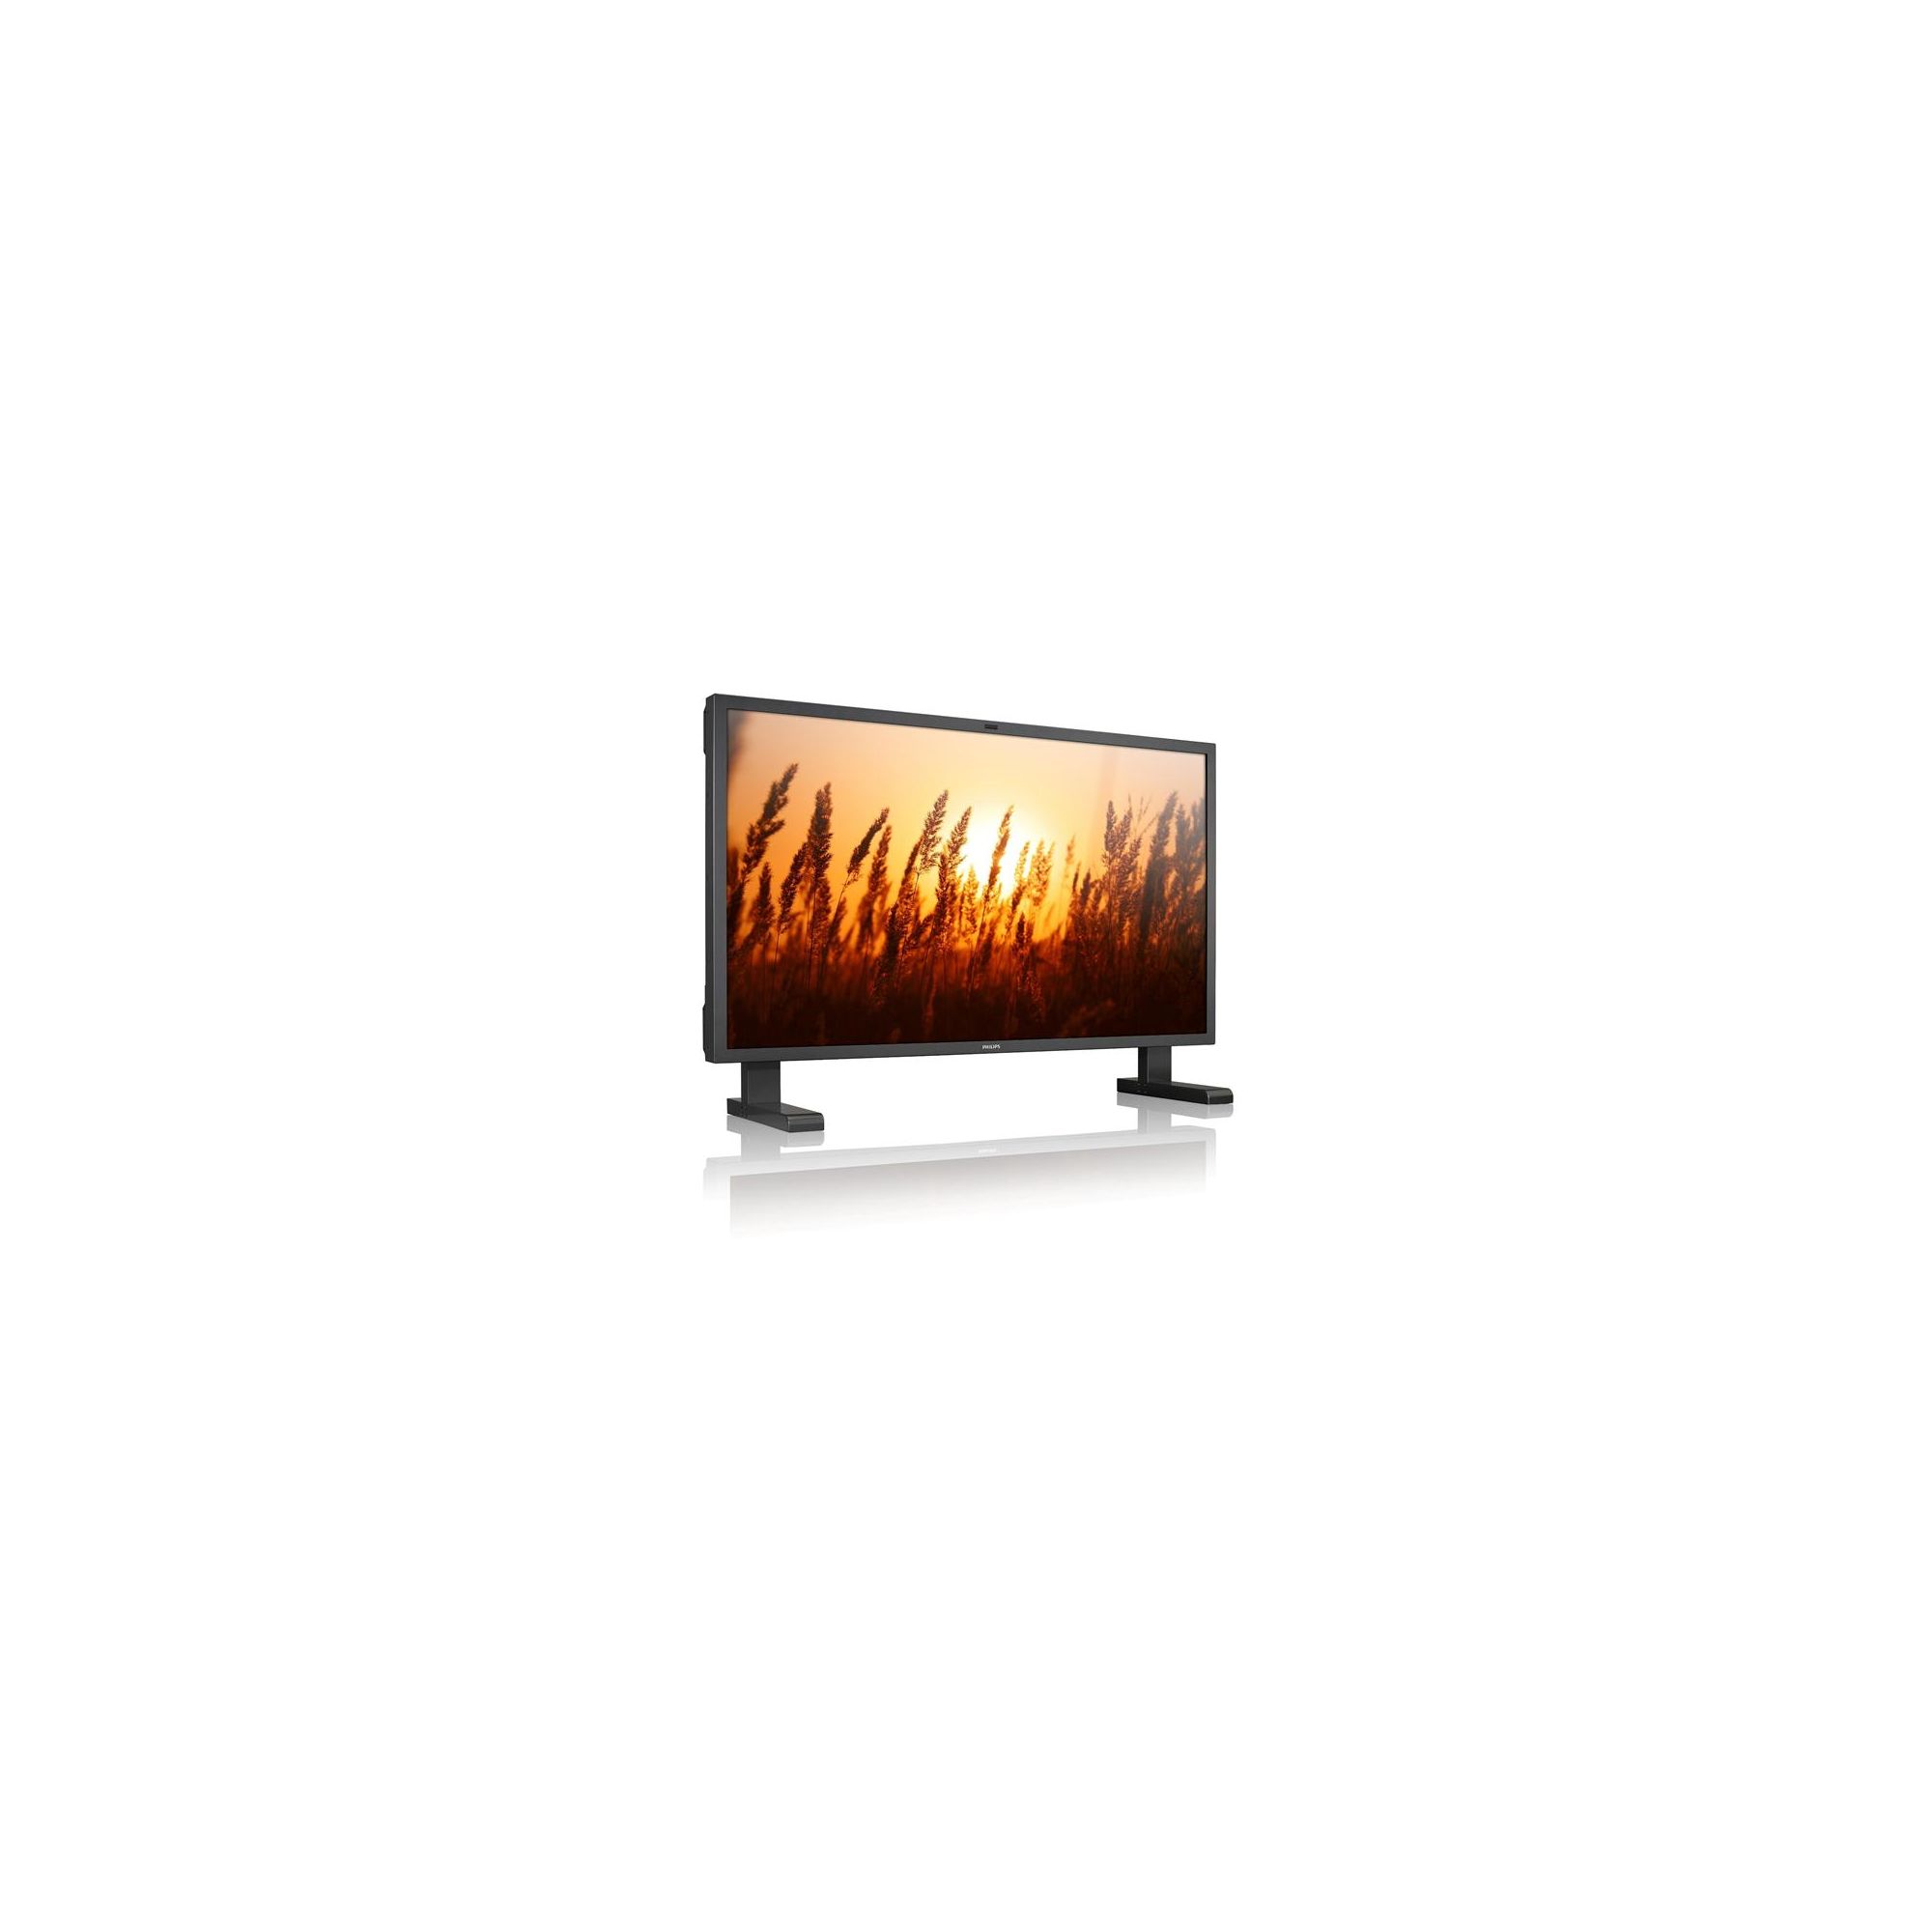 Philips BDL6531E – 65 inch LCD flat panel display